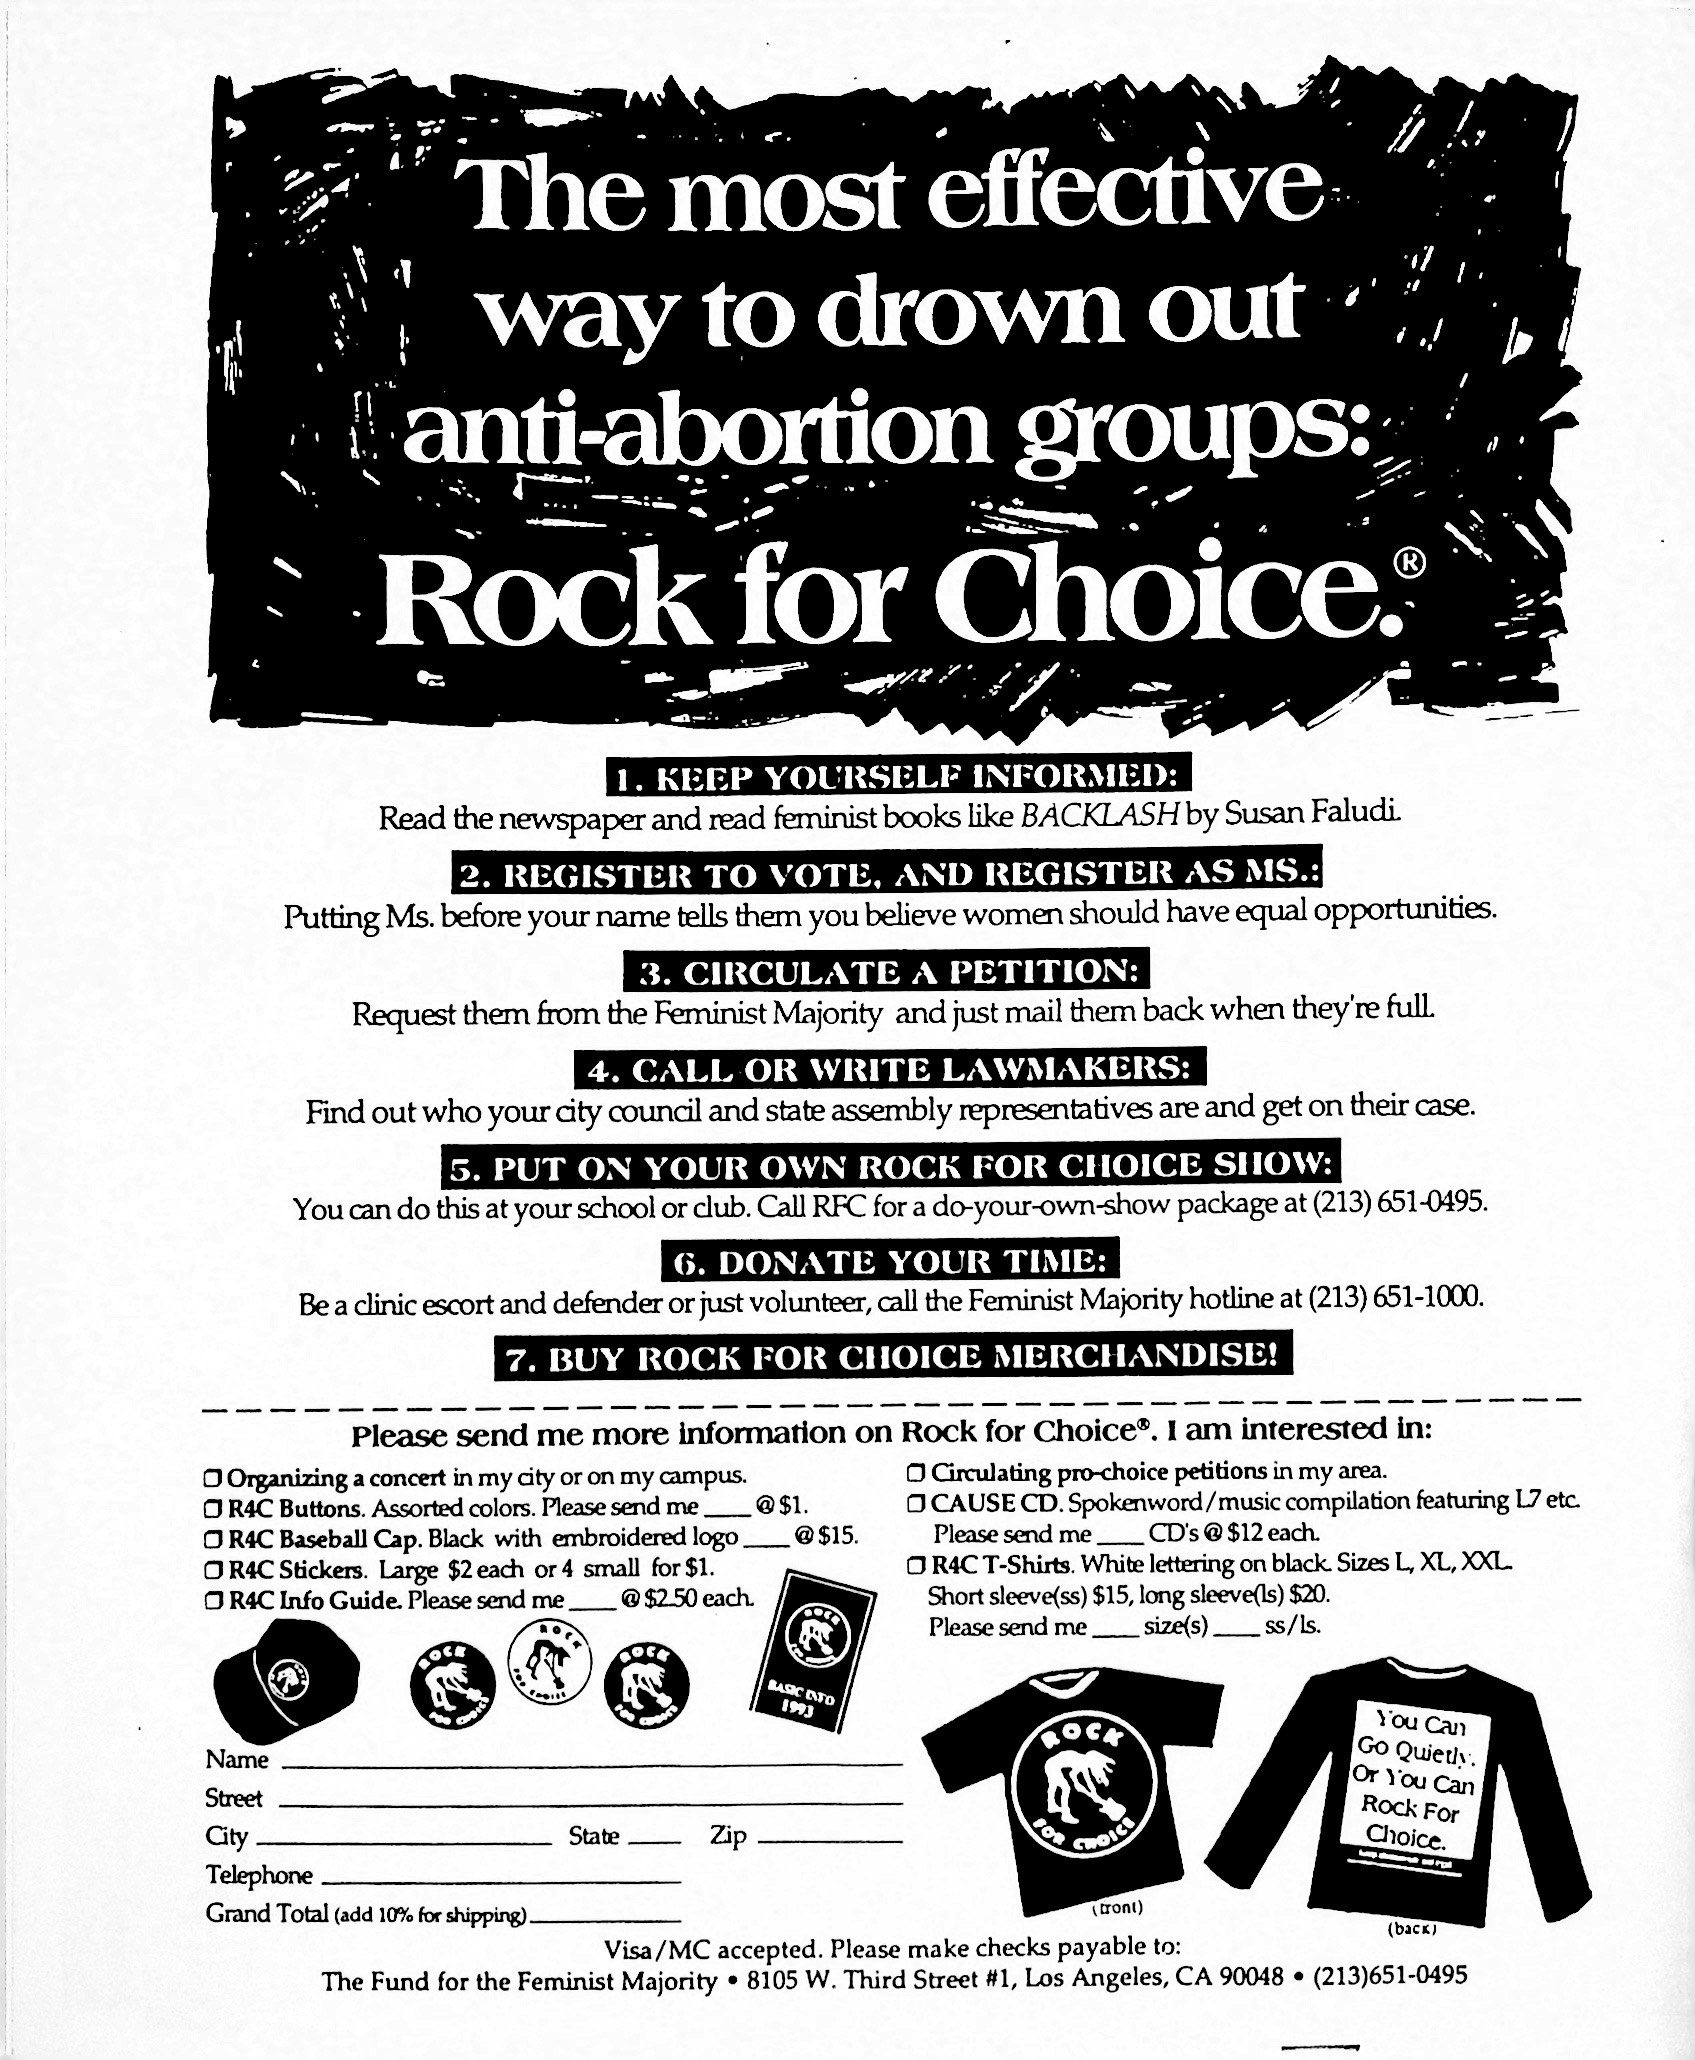 Rock for Choice ad from the back cover of Teen Fag #2, 1993